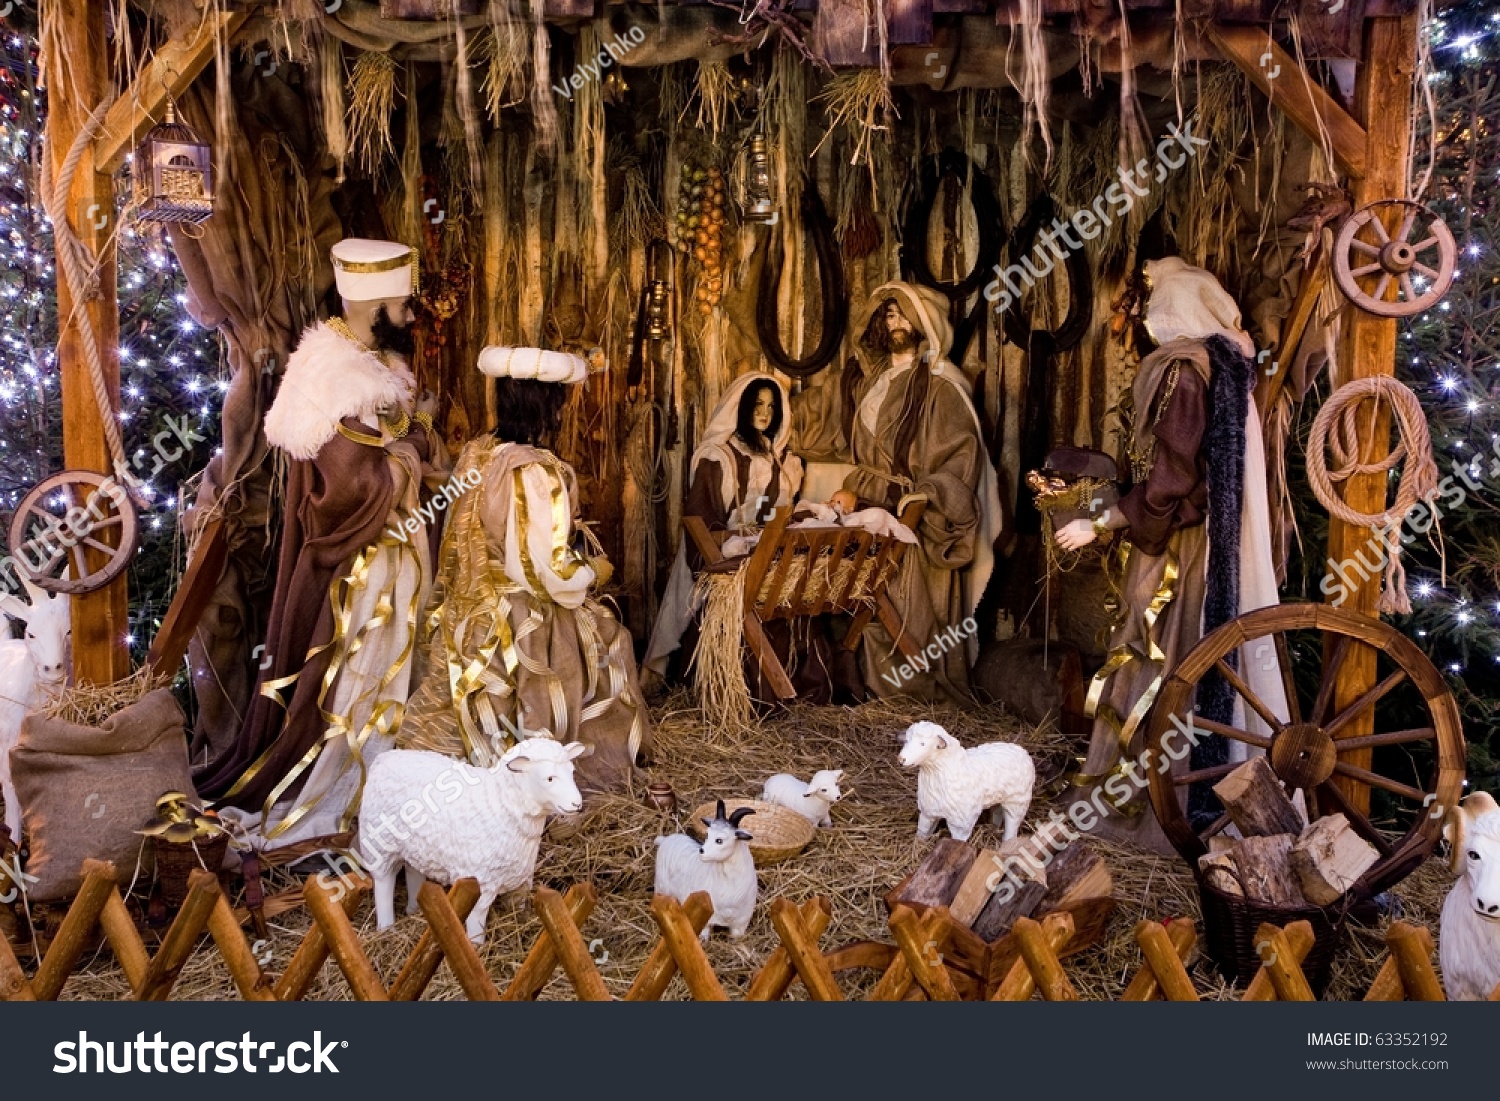 Christmas Nativity Scene With Three Wise Men Presenting Gifts To Baby ...